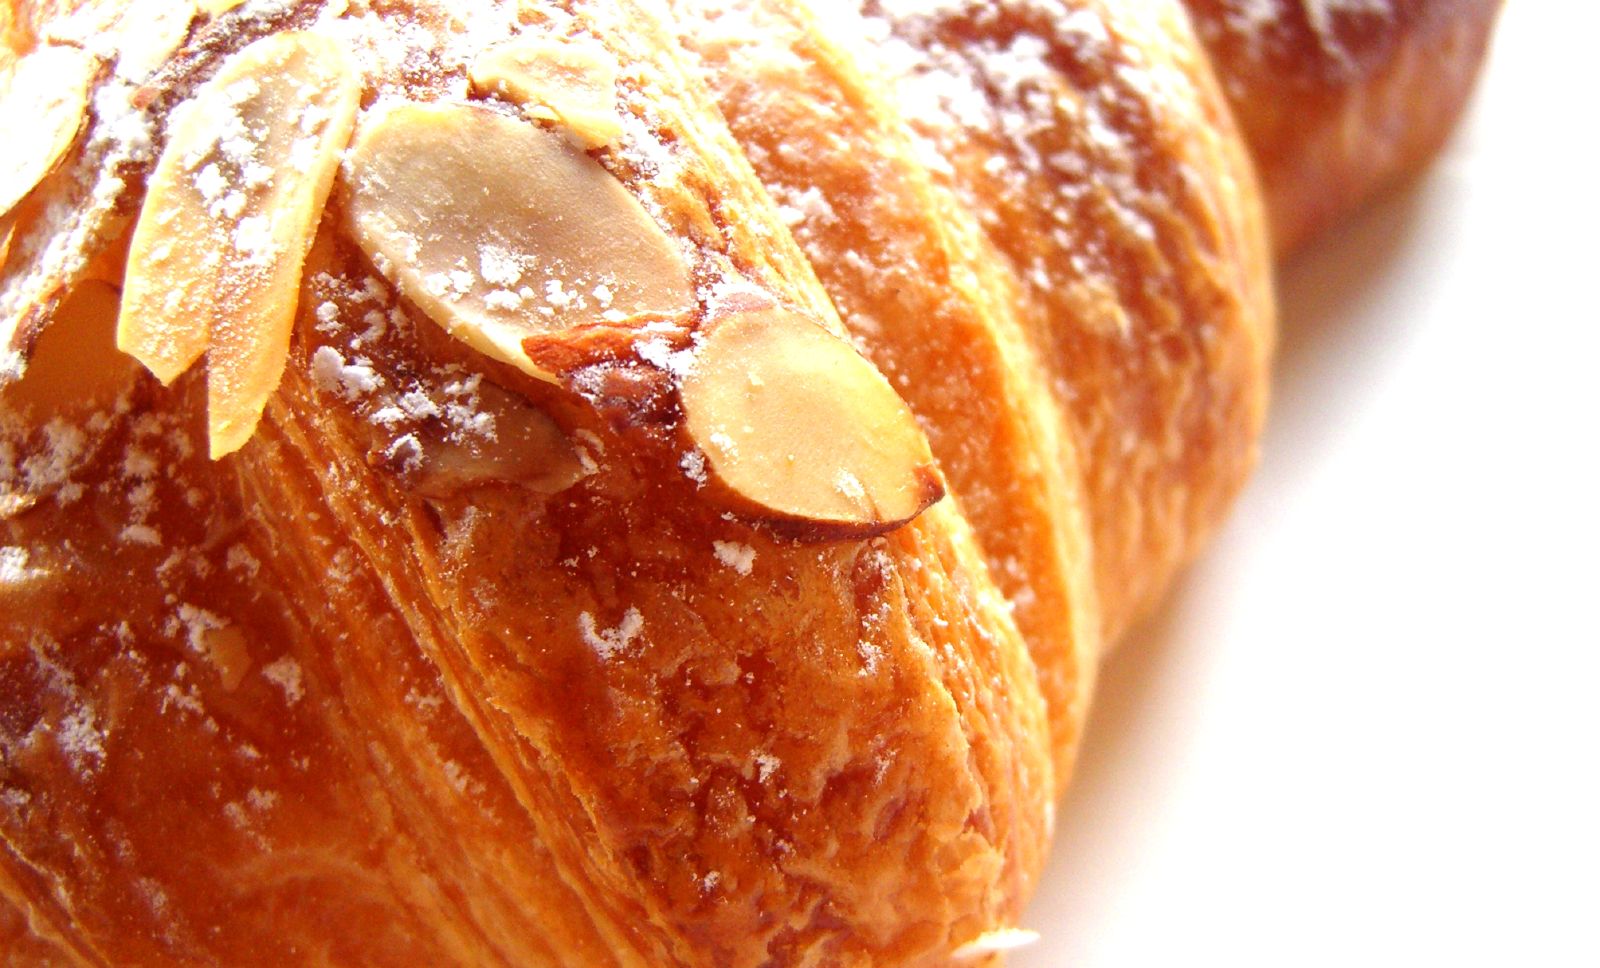 a fresh baked pastry with almonds and powdered sugar